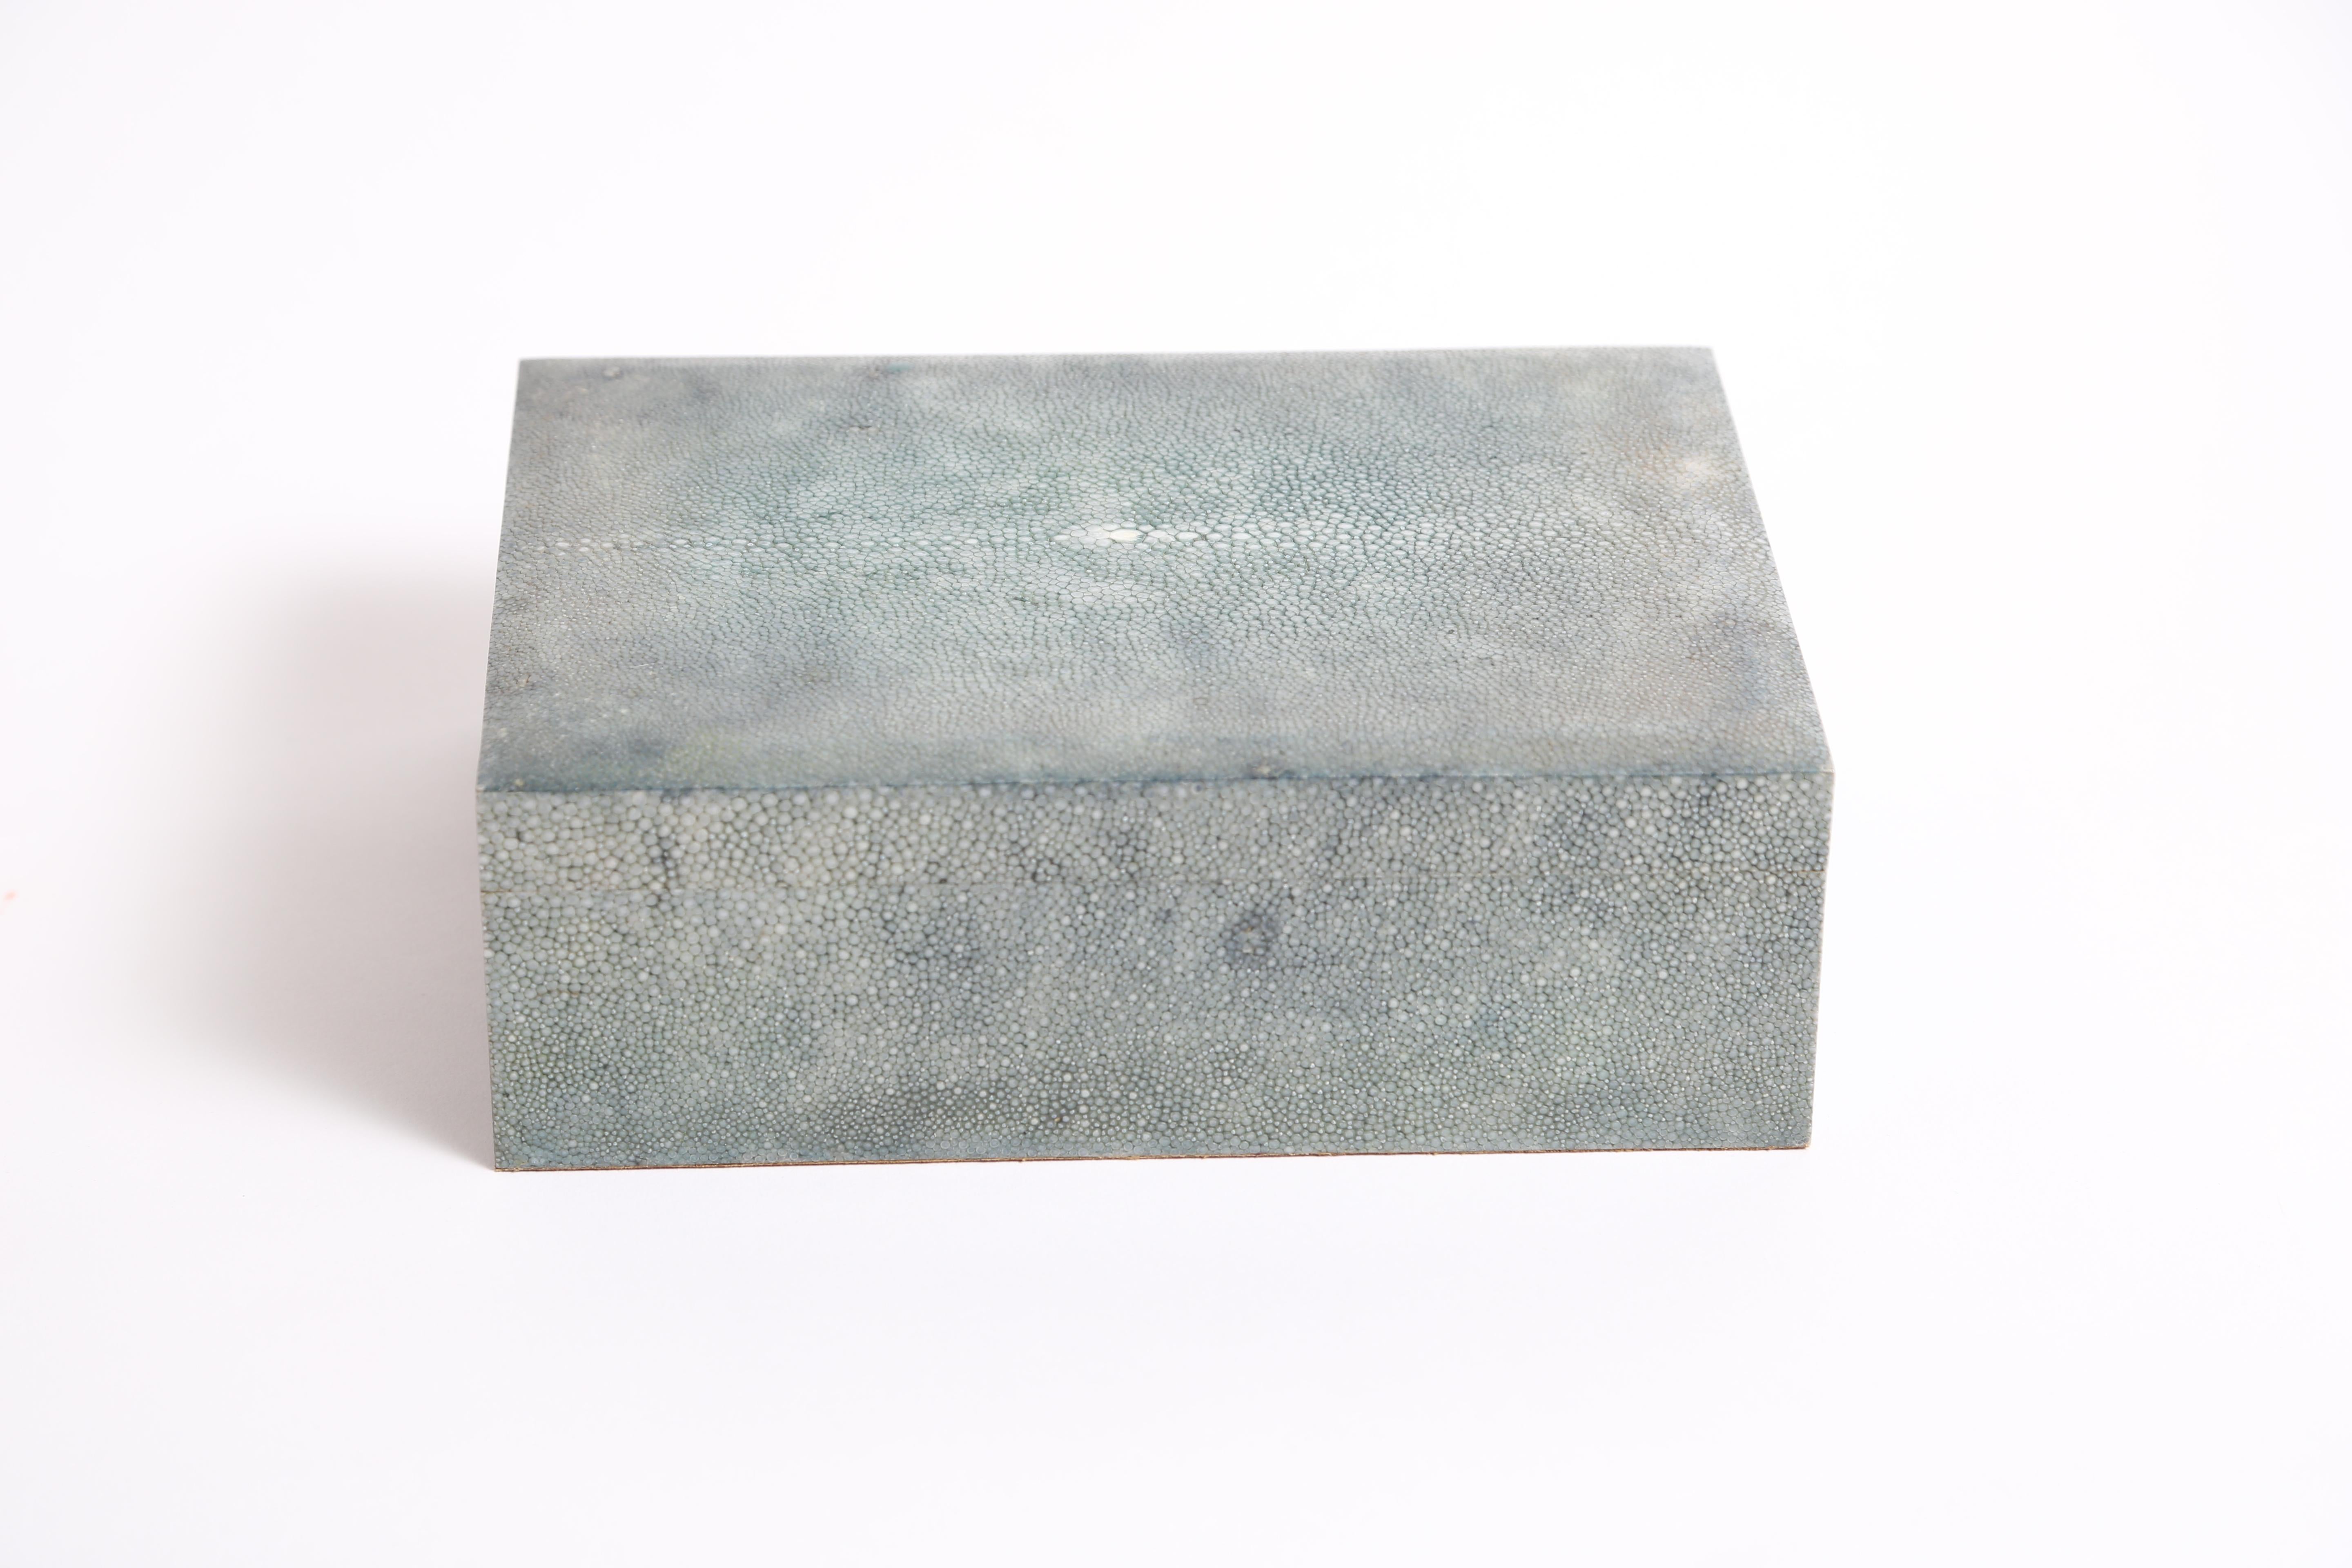 Maitland Smith Shagreen lidded box with wood interior.
Retains original label on the underside.